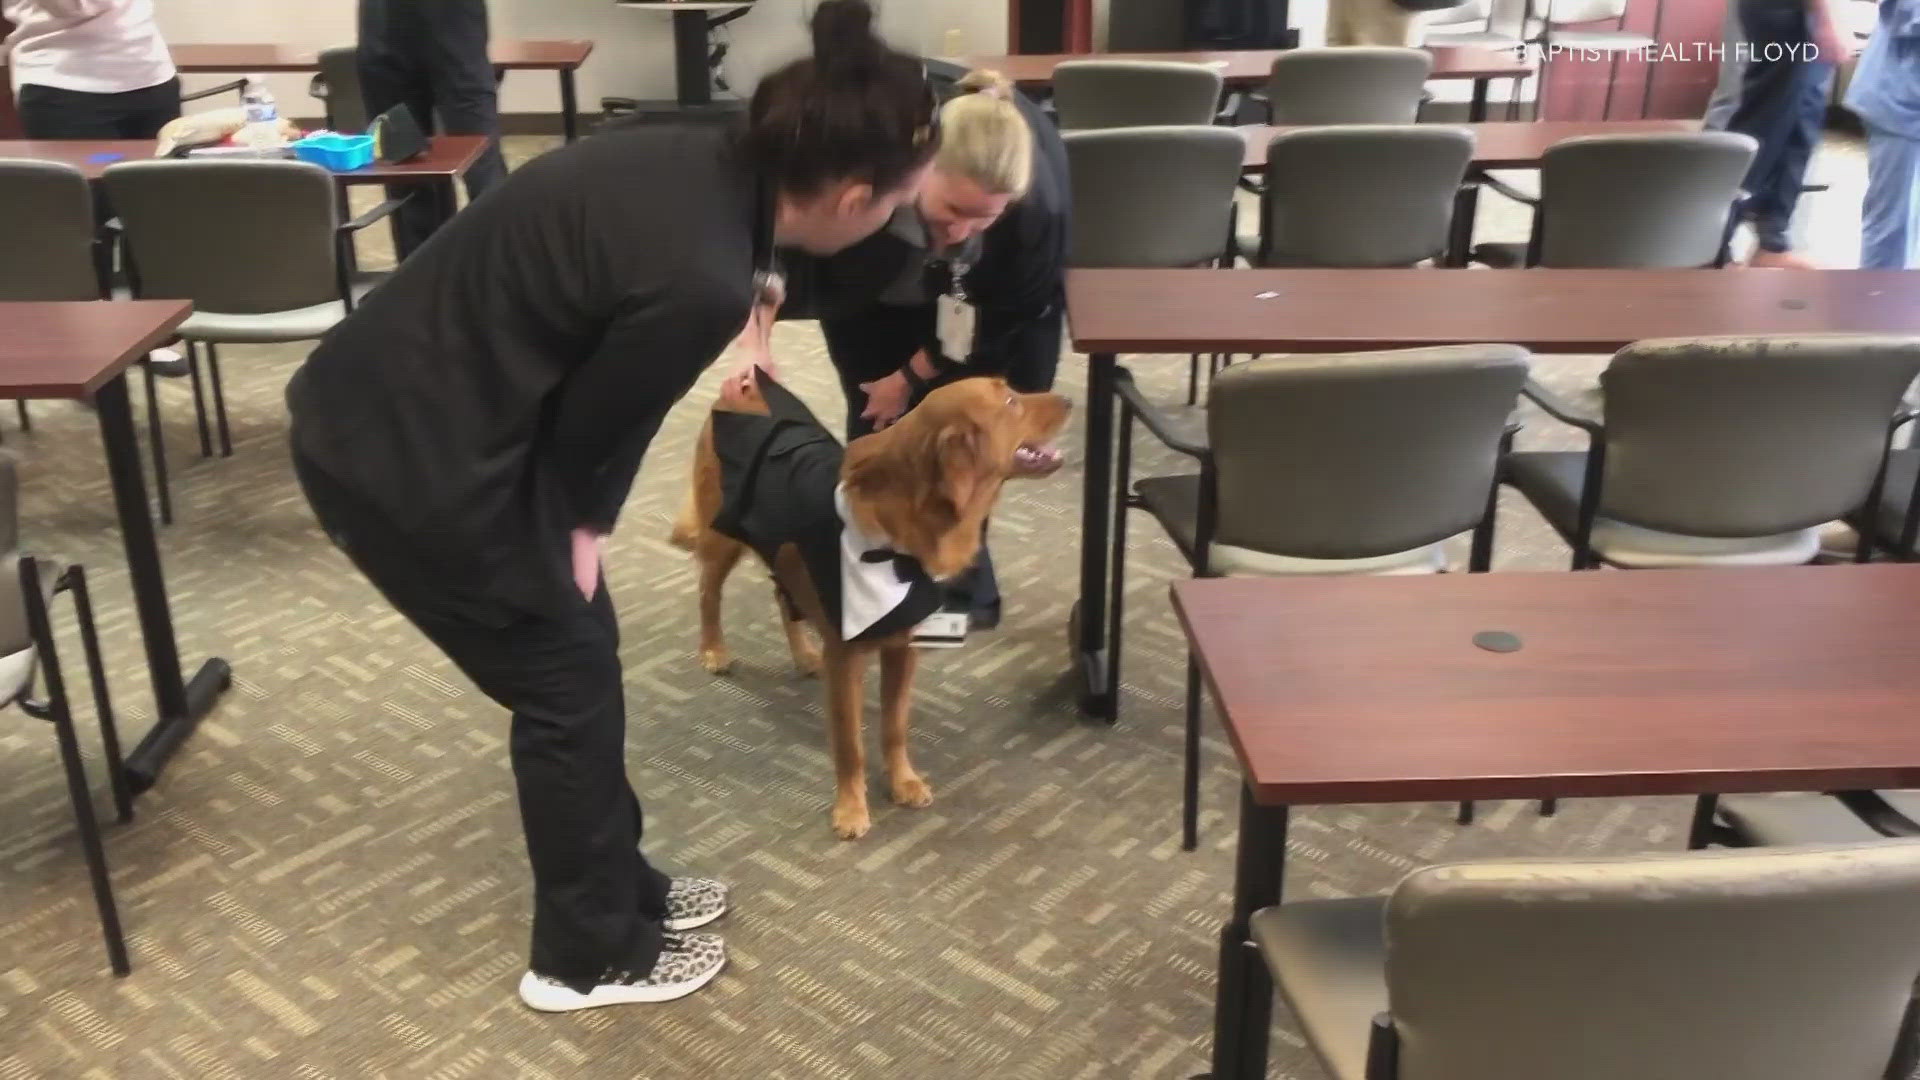 Meet Dr. Floyd Wags, the newest therapy dog on staff at Baptist Health in Louisville.